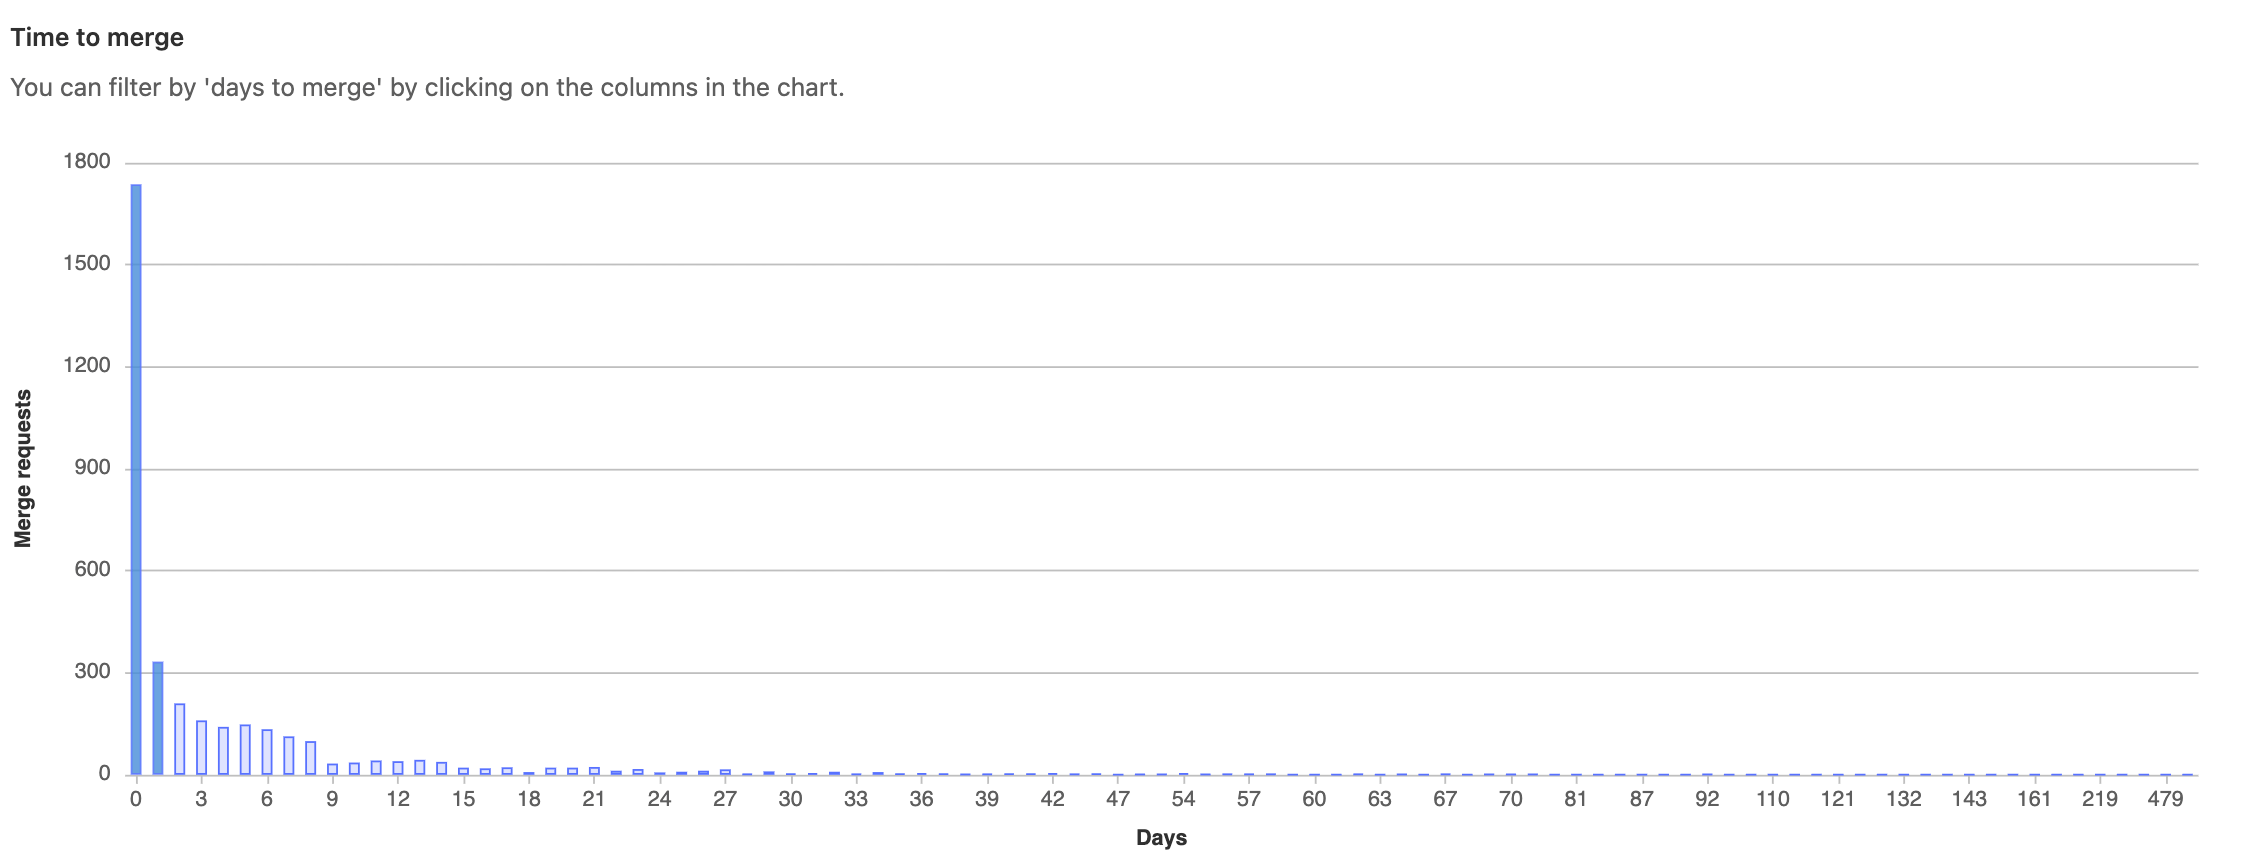 Metrics for number of days merge requests per number of days